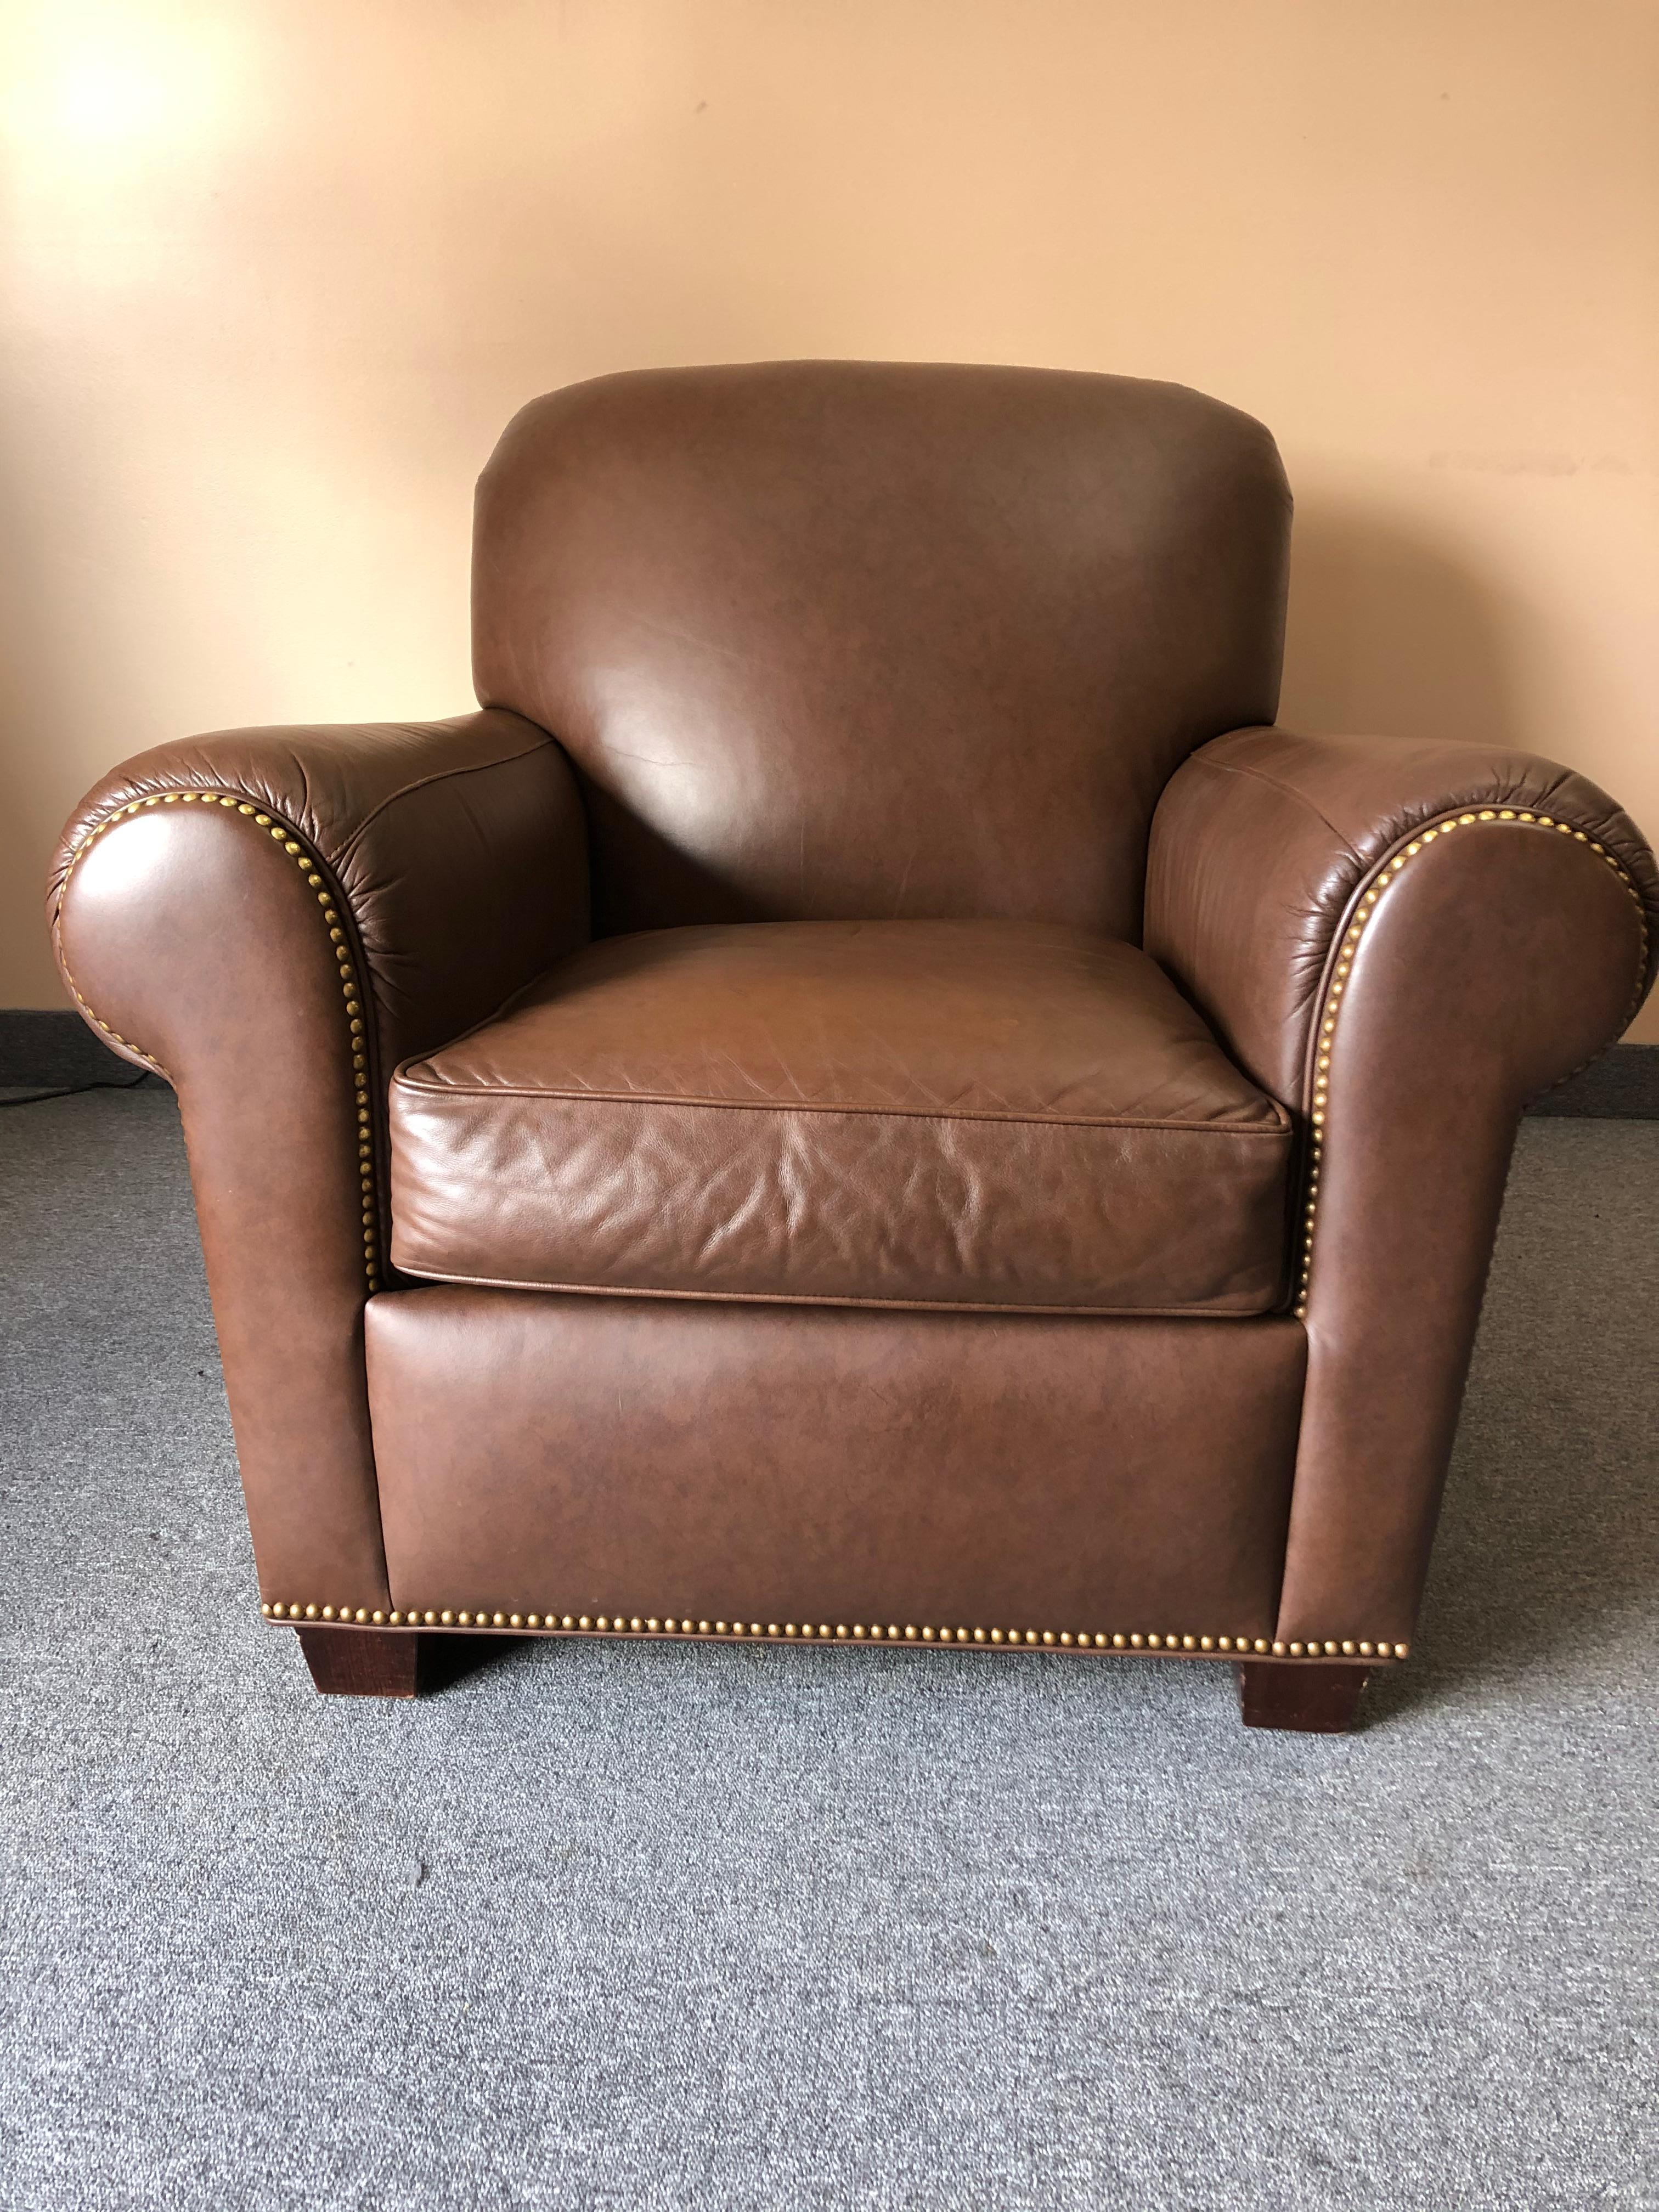 A big comfy classic soft brown leather club chair with curved arms finished with nailheads.
Measures: Seat depth 22
Arm height 26

Note: We have a second slightly lighter colored leather club chair that works to make a pair.